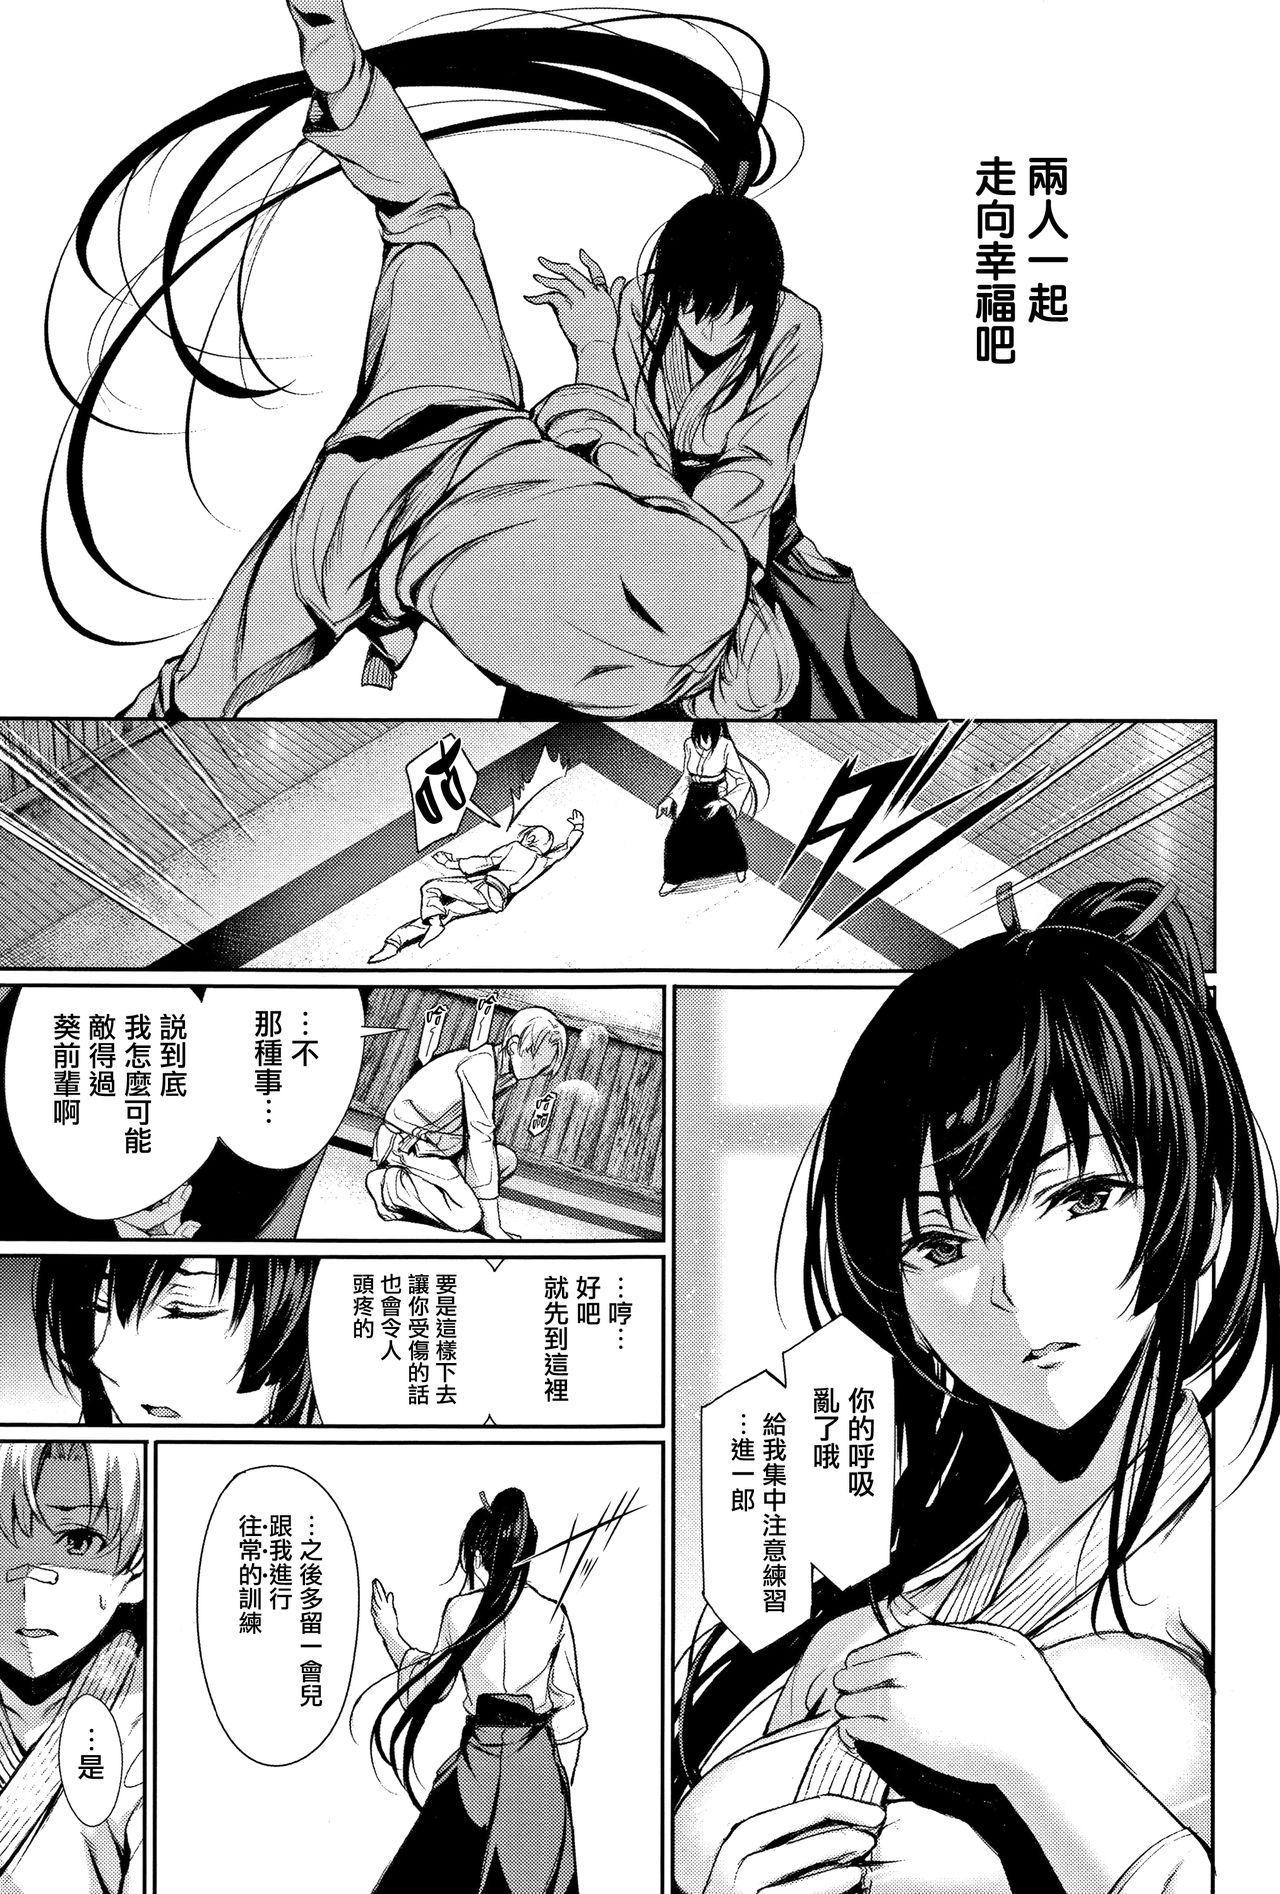 Sex Toys Kimi Omou Koi - I think of you. Ch. 1 Pussyeating - Page 8